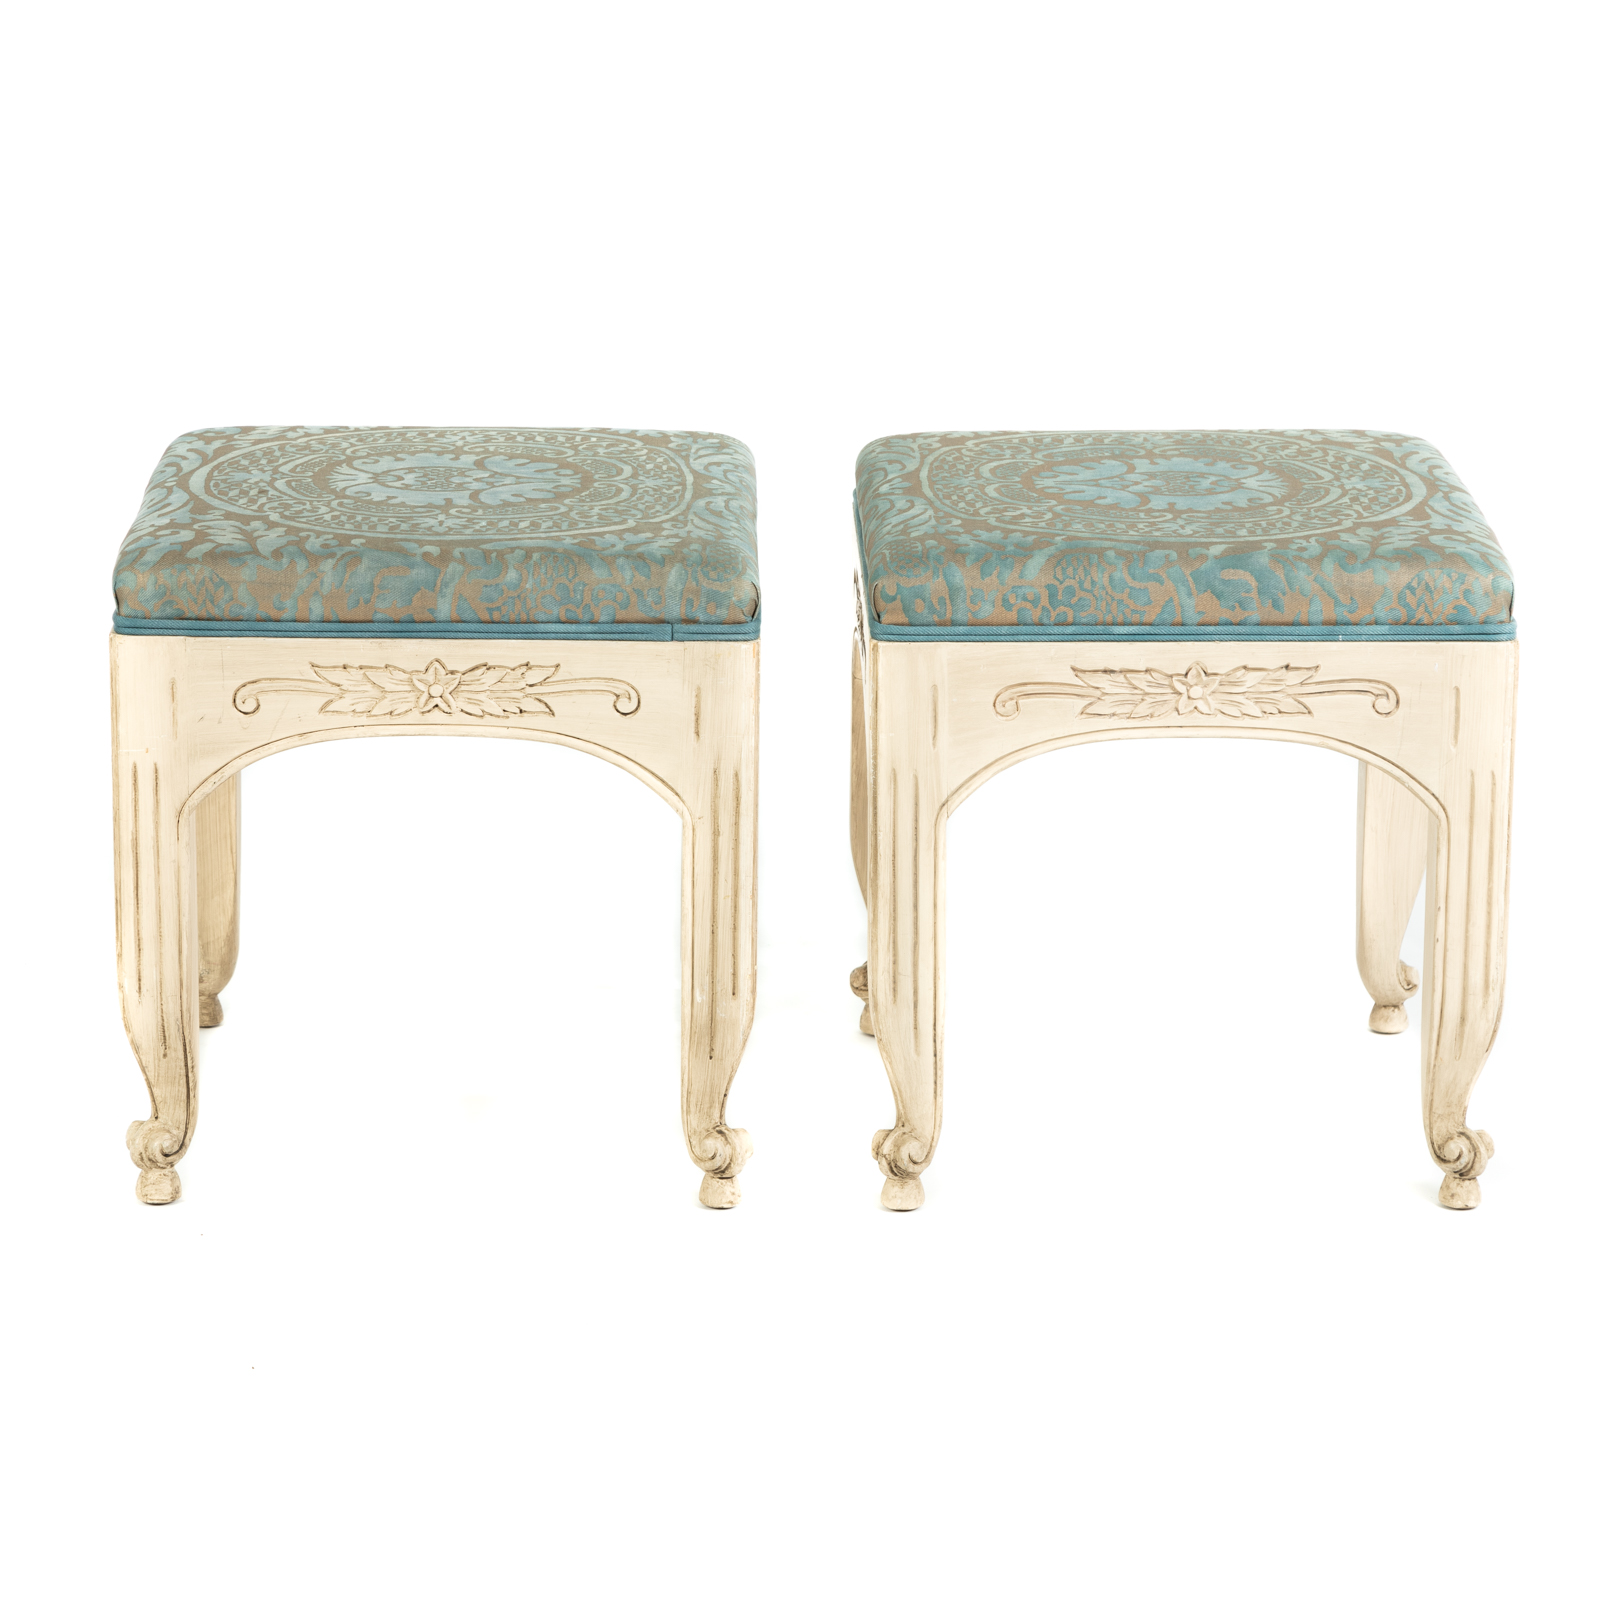 A PAIR OF LOUIS XV STYLE PAINTED